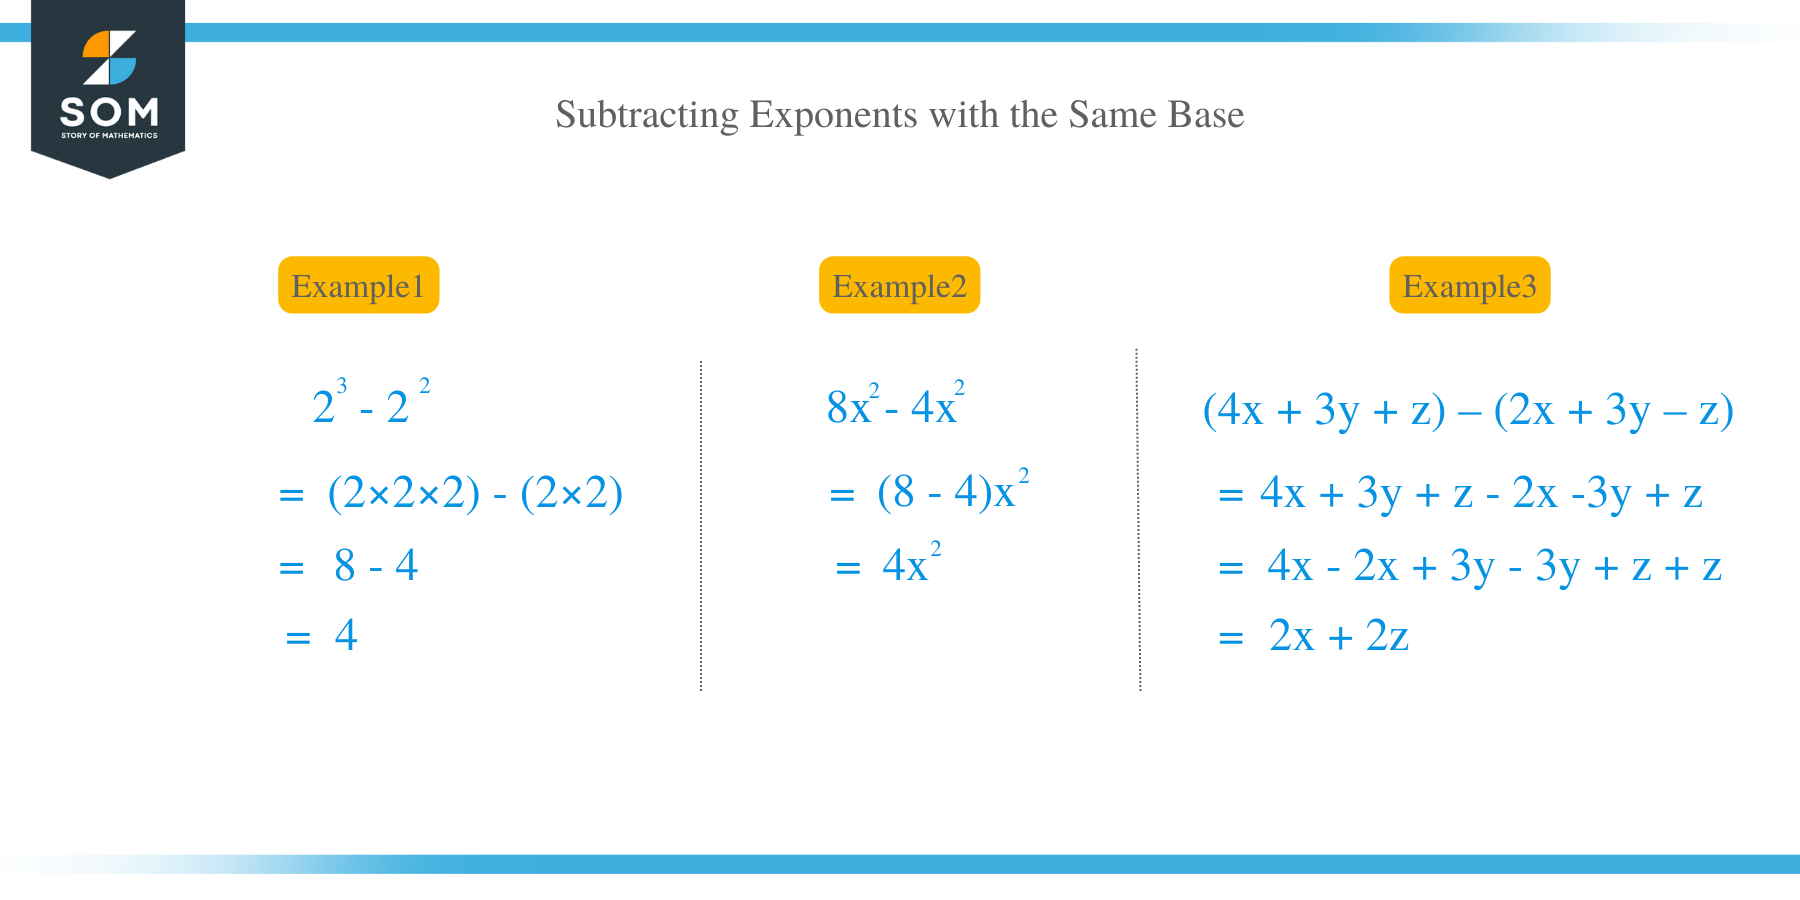 Subtracting Exponents with the Same Base